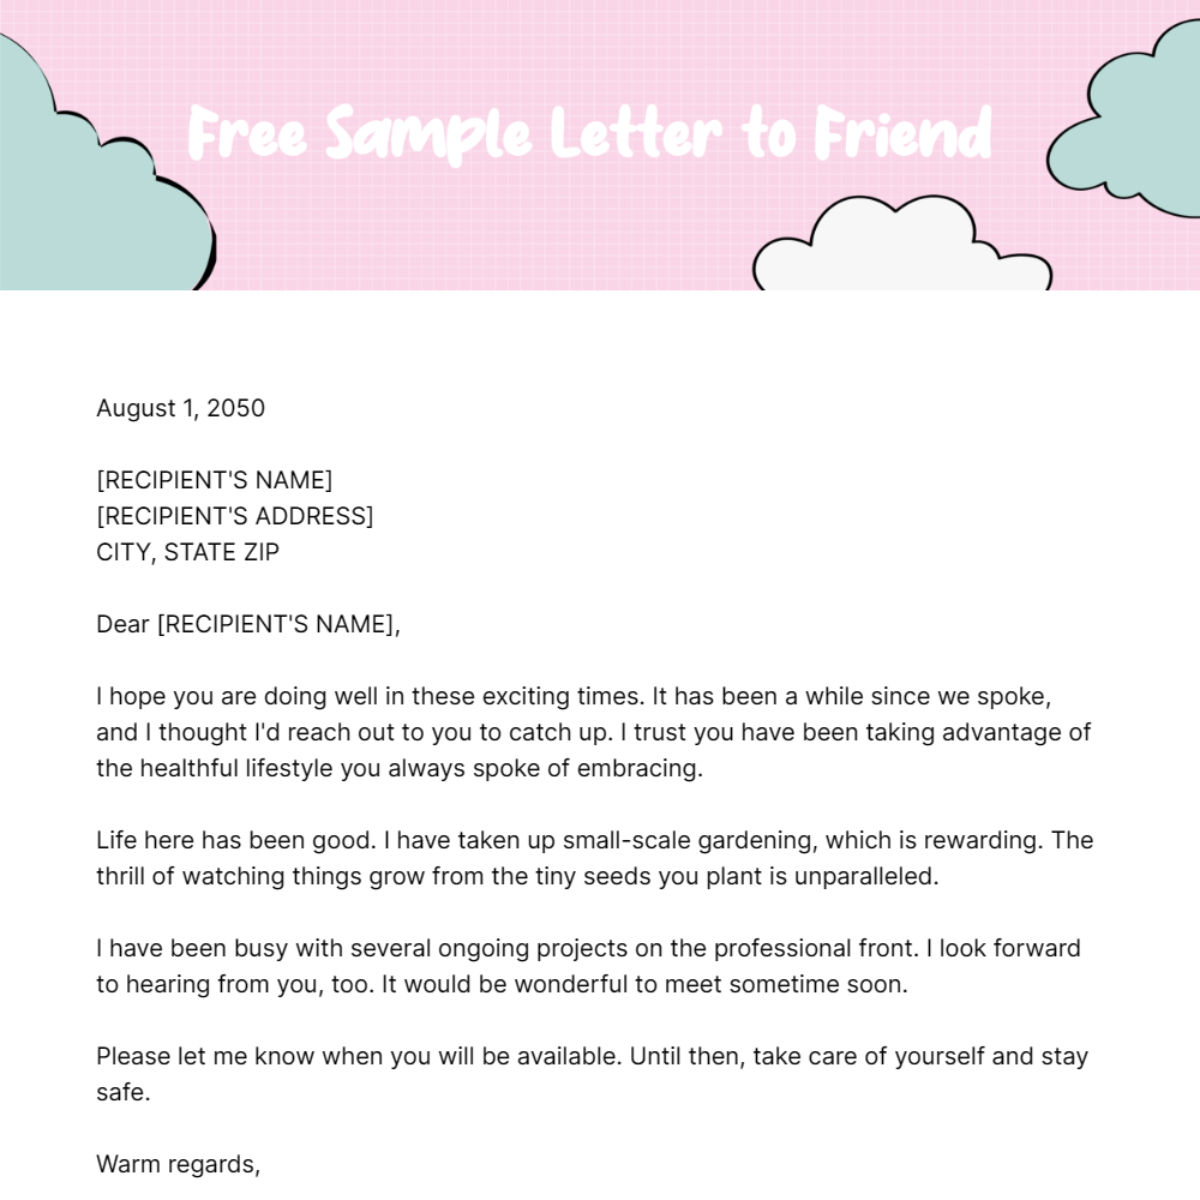 Sample Letter to Friend Template